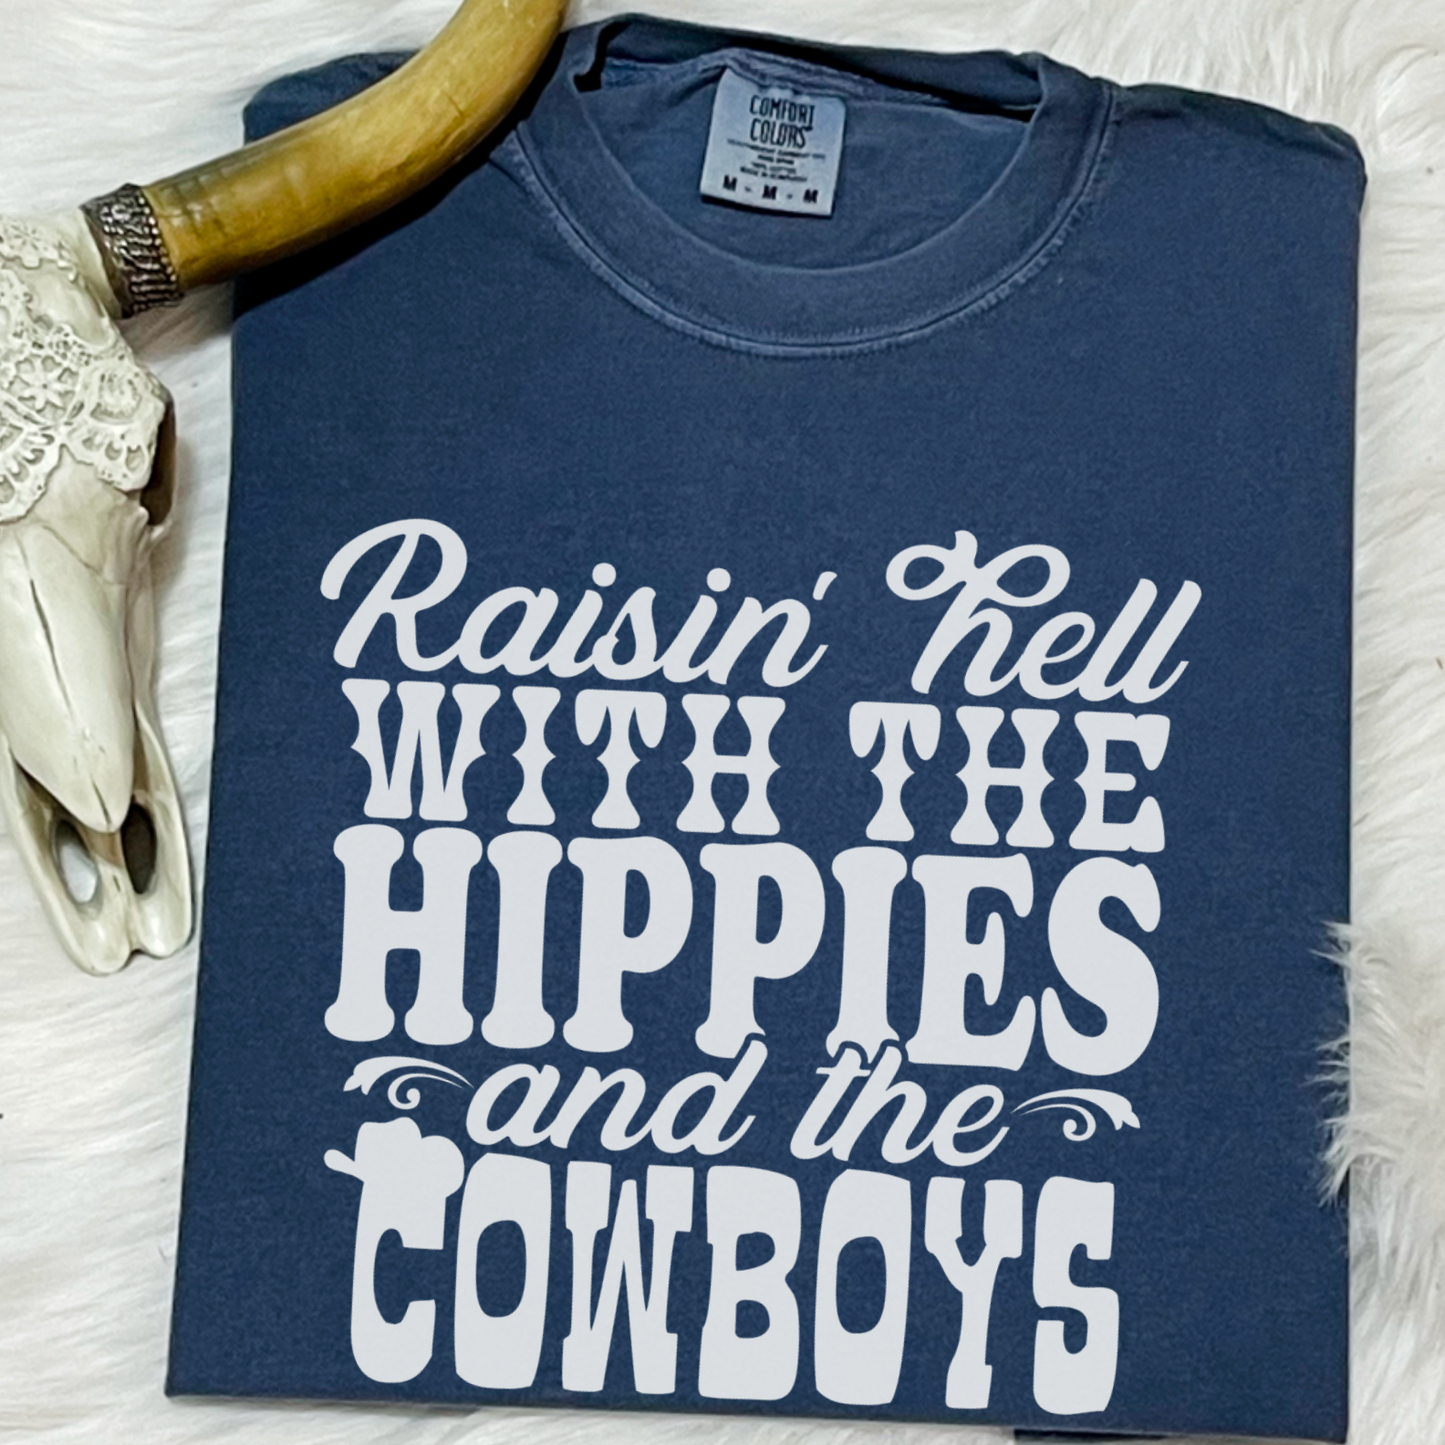 Raising Hell With The Hippes And Cowboys Comfort Color Graphic Tee